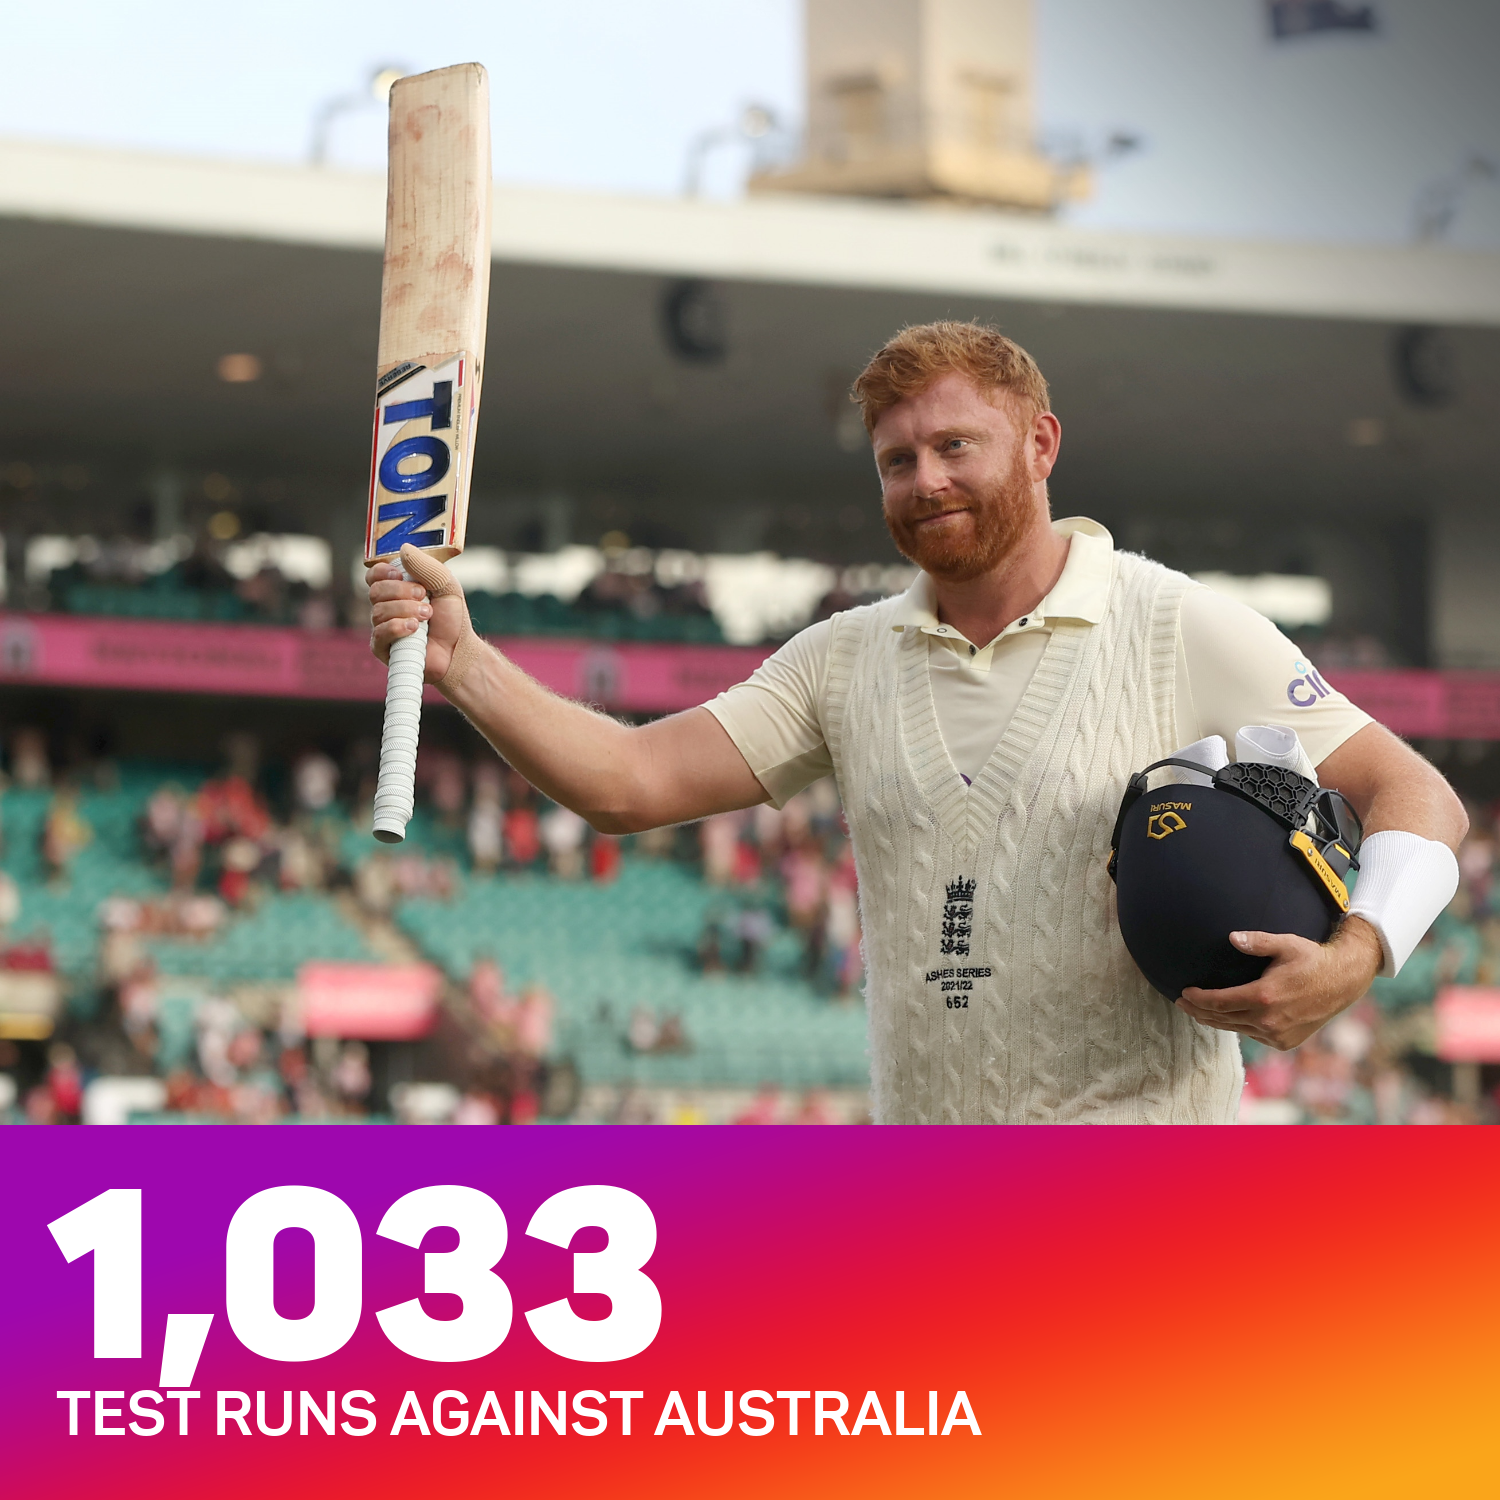 Jonny Bairstow has scored more Test runs against Australia than any other team